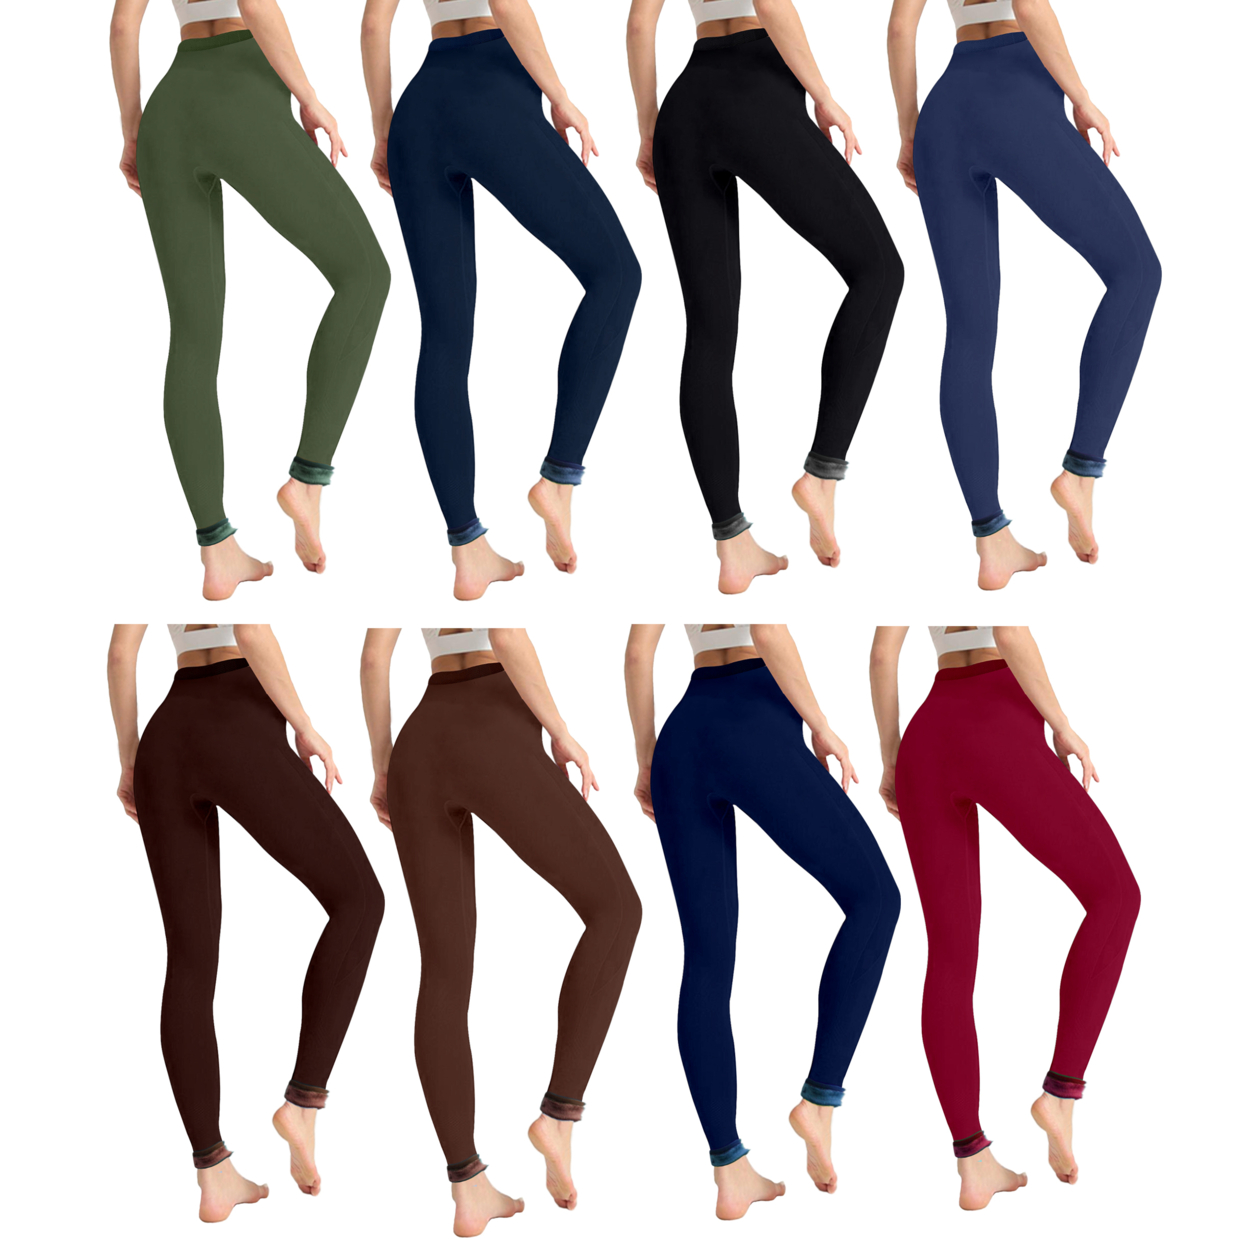 4-Pack: Women's Winter Warm Thick Fur Lined Thermal Leggings (S-2XL) - Assorted, 1X/2X